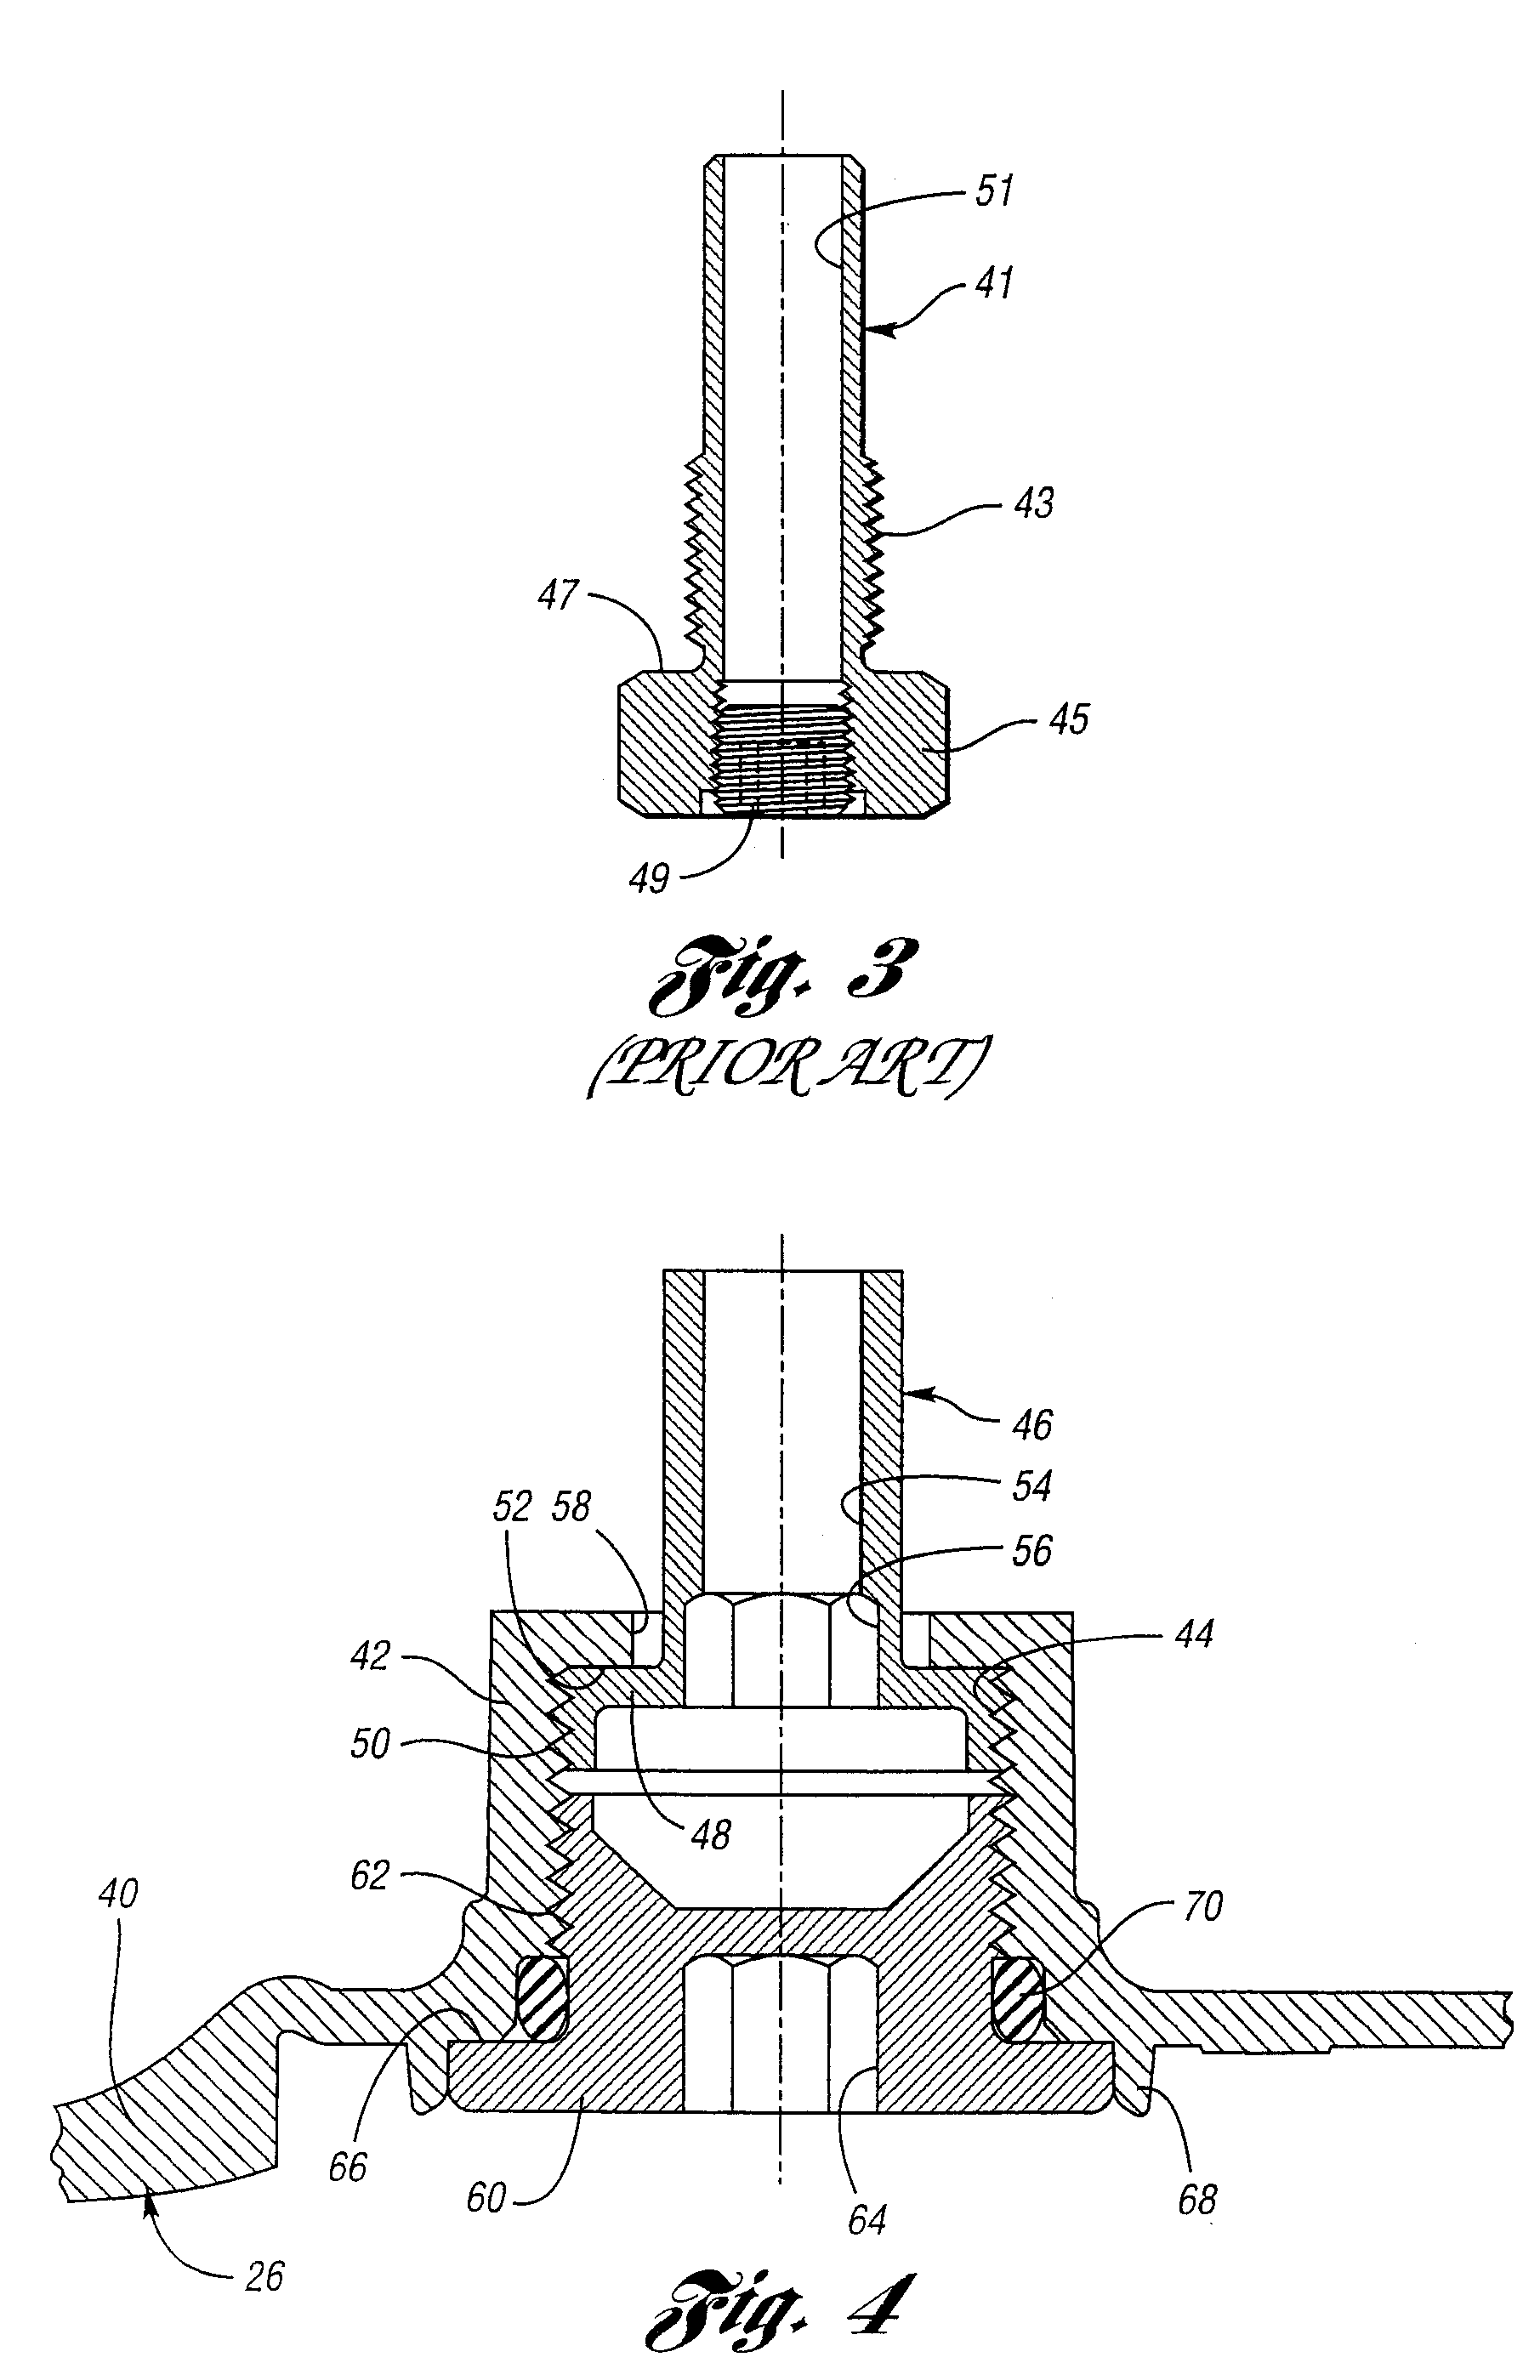 Externally serviceable transmission sump fill pipe and drain port assembly